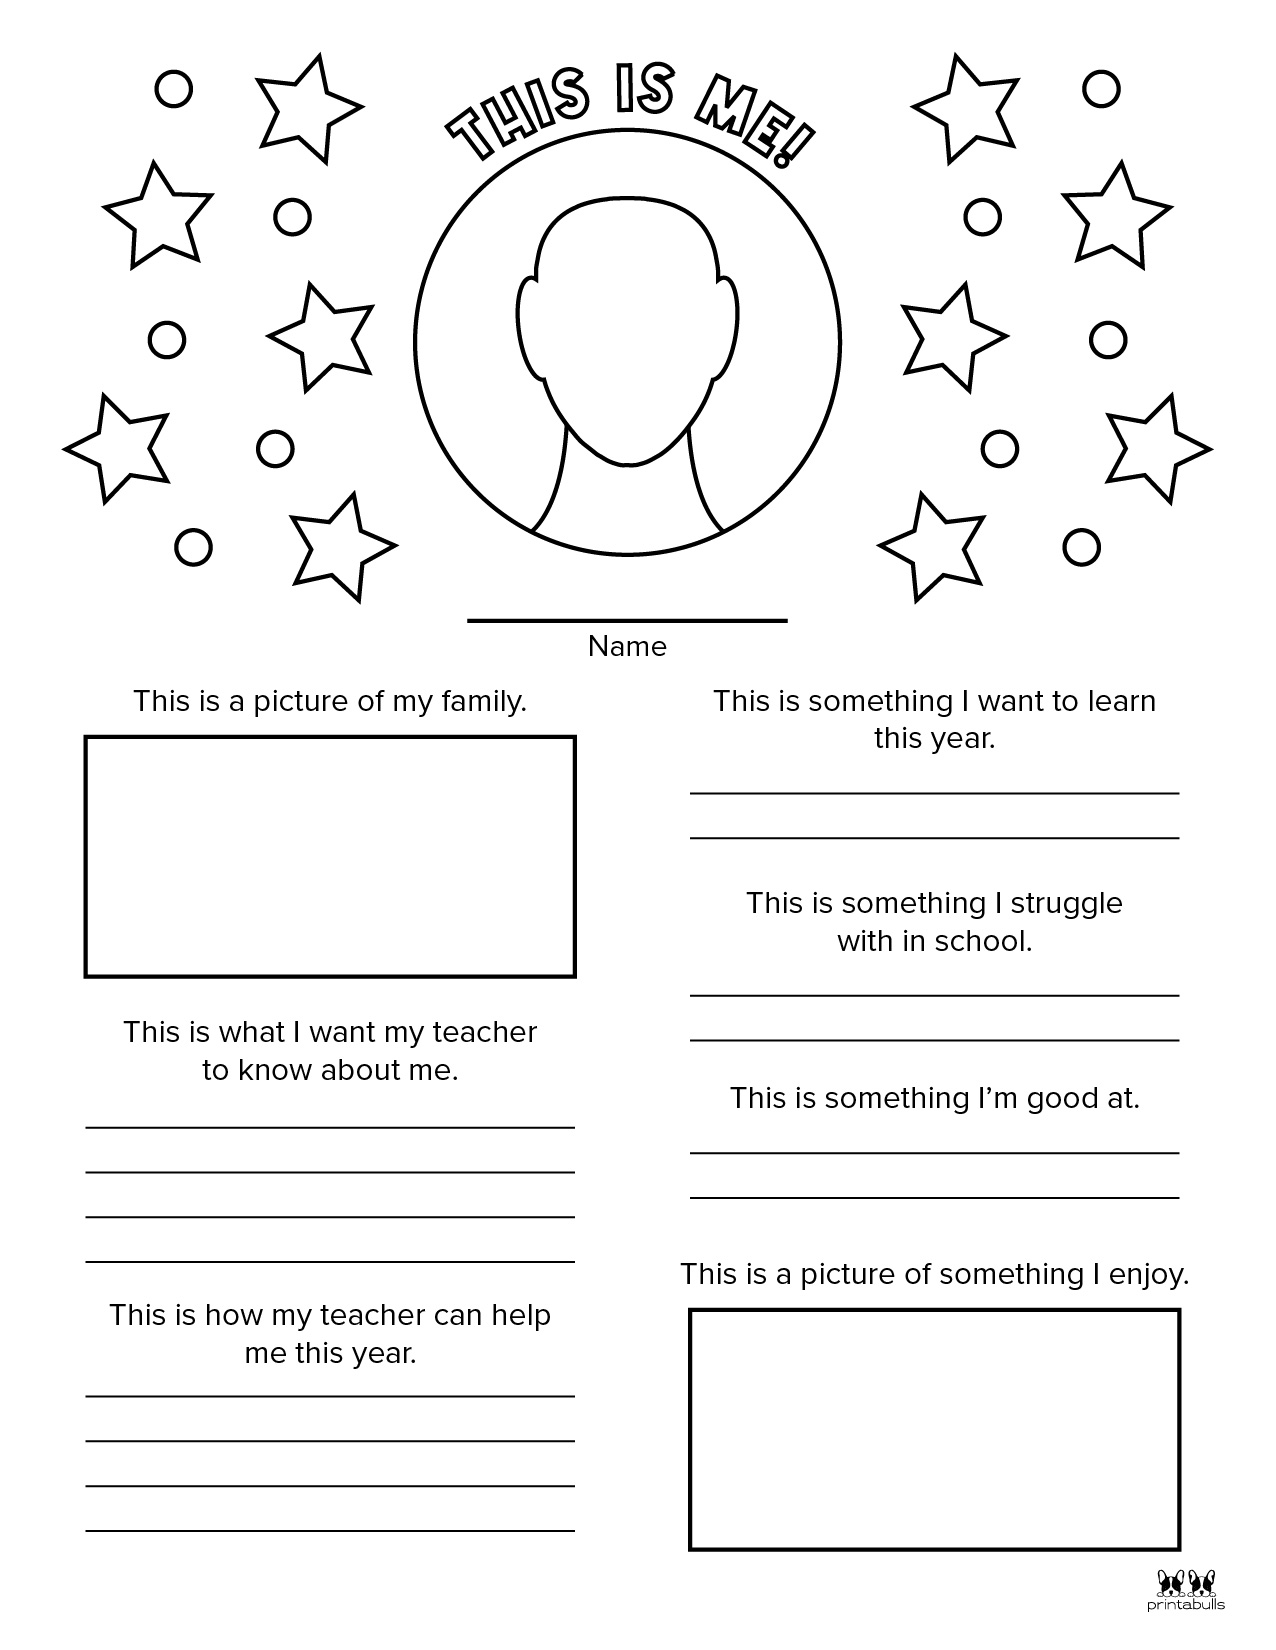 all-about-me-is-a-popular-teaching-strategy-for-kids-this-activity-has